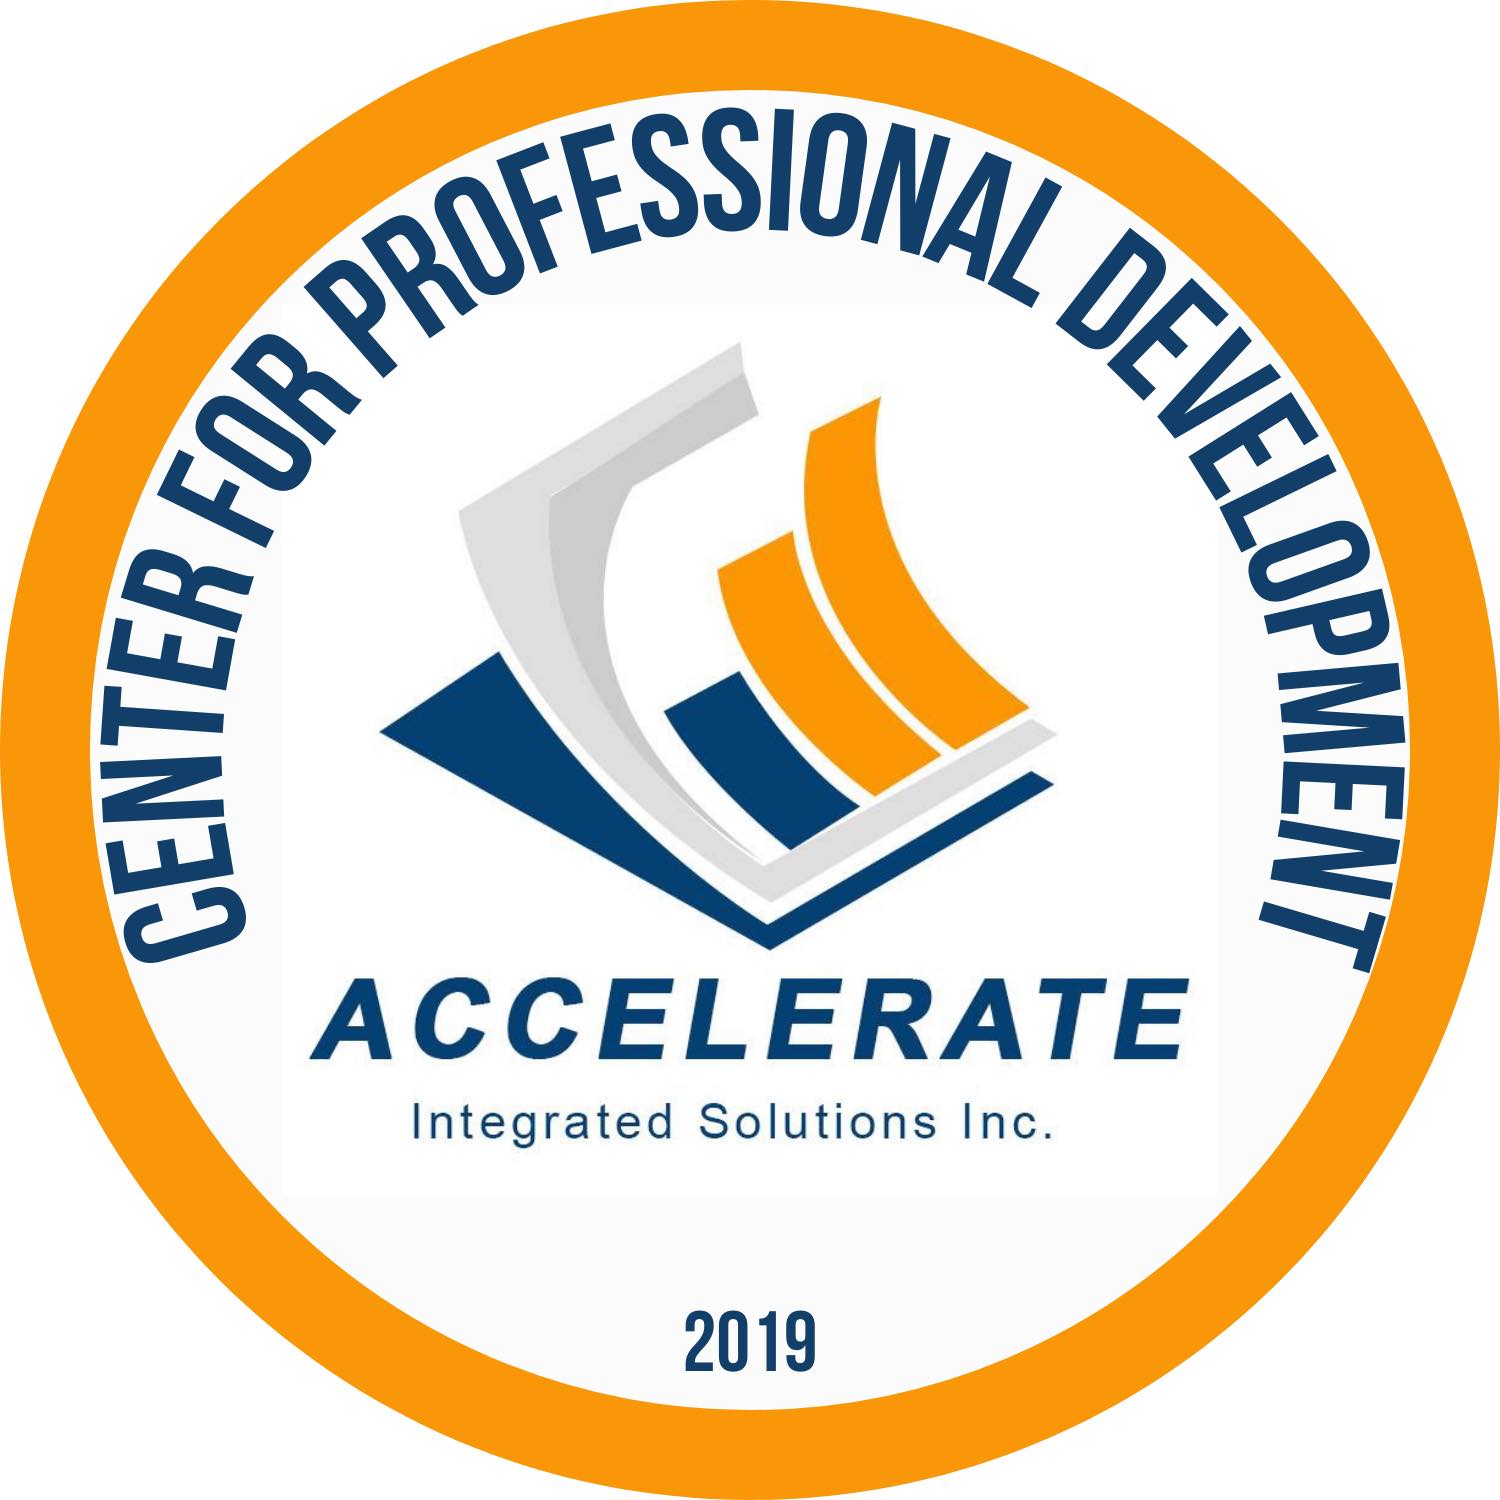 Accelerate Integrated Solutions Inc.